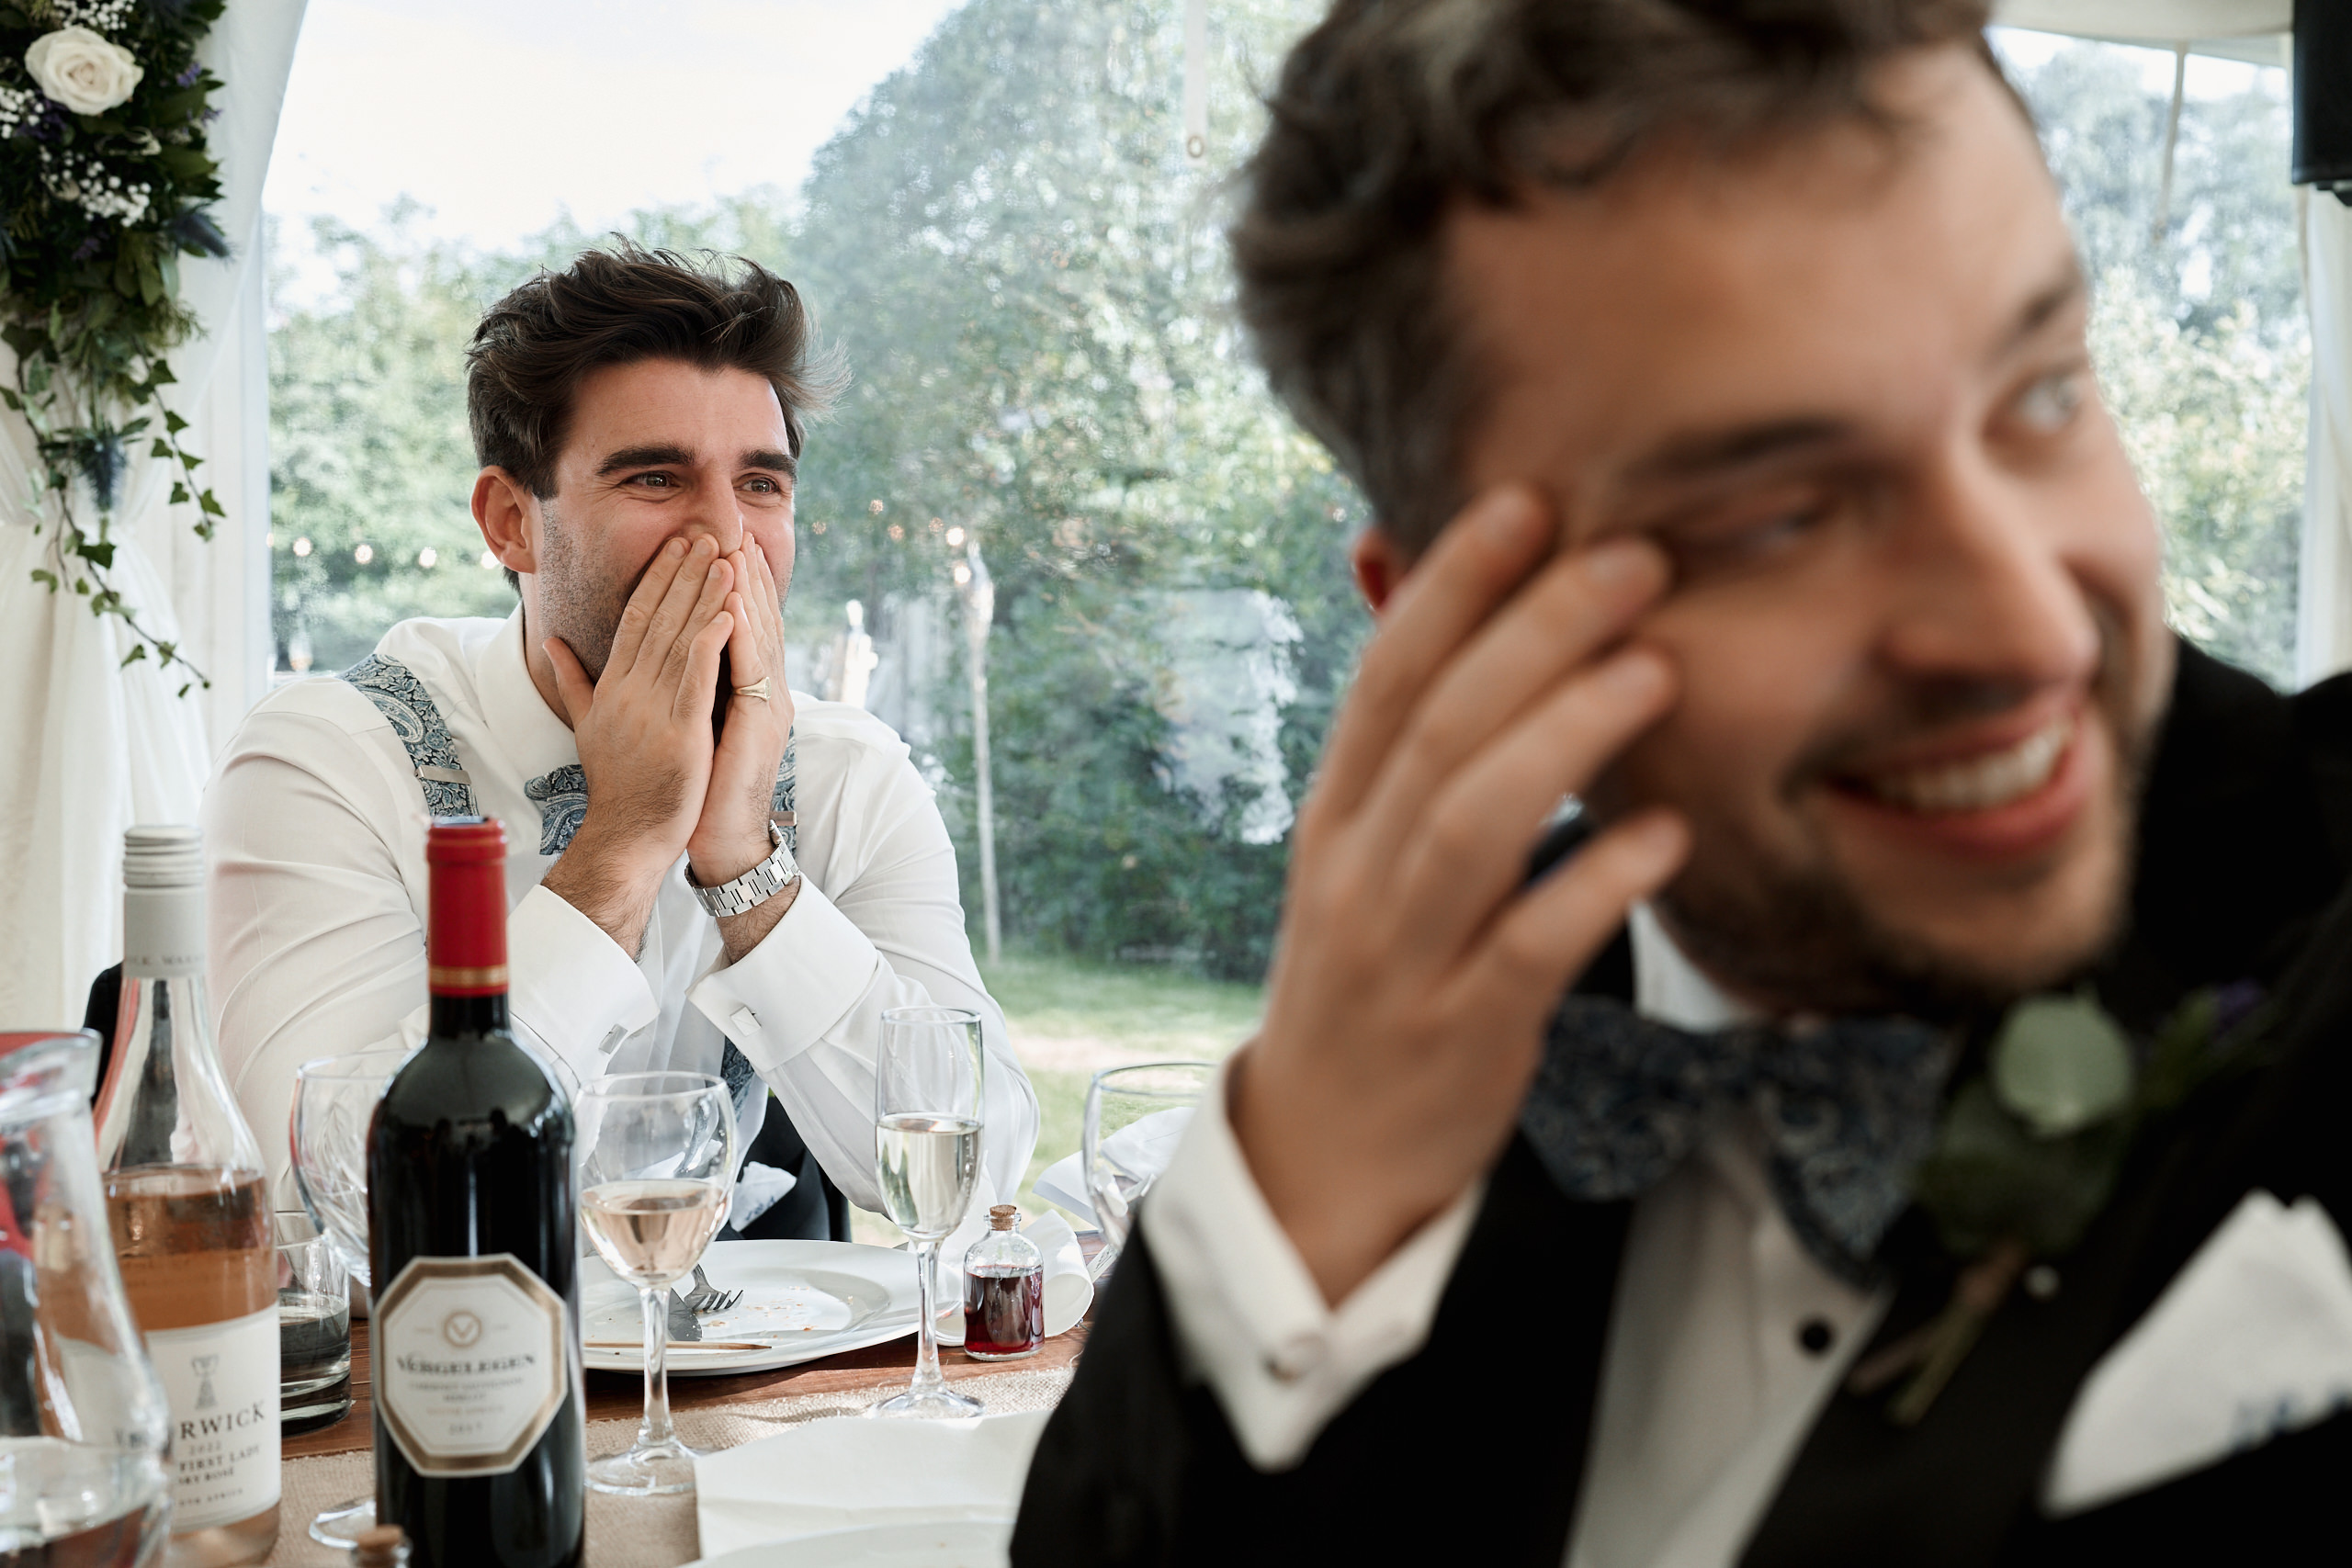 A guy in a tux and bow tie is sitting at a table with a bottle of wine.